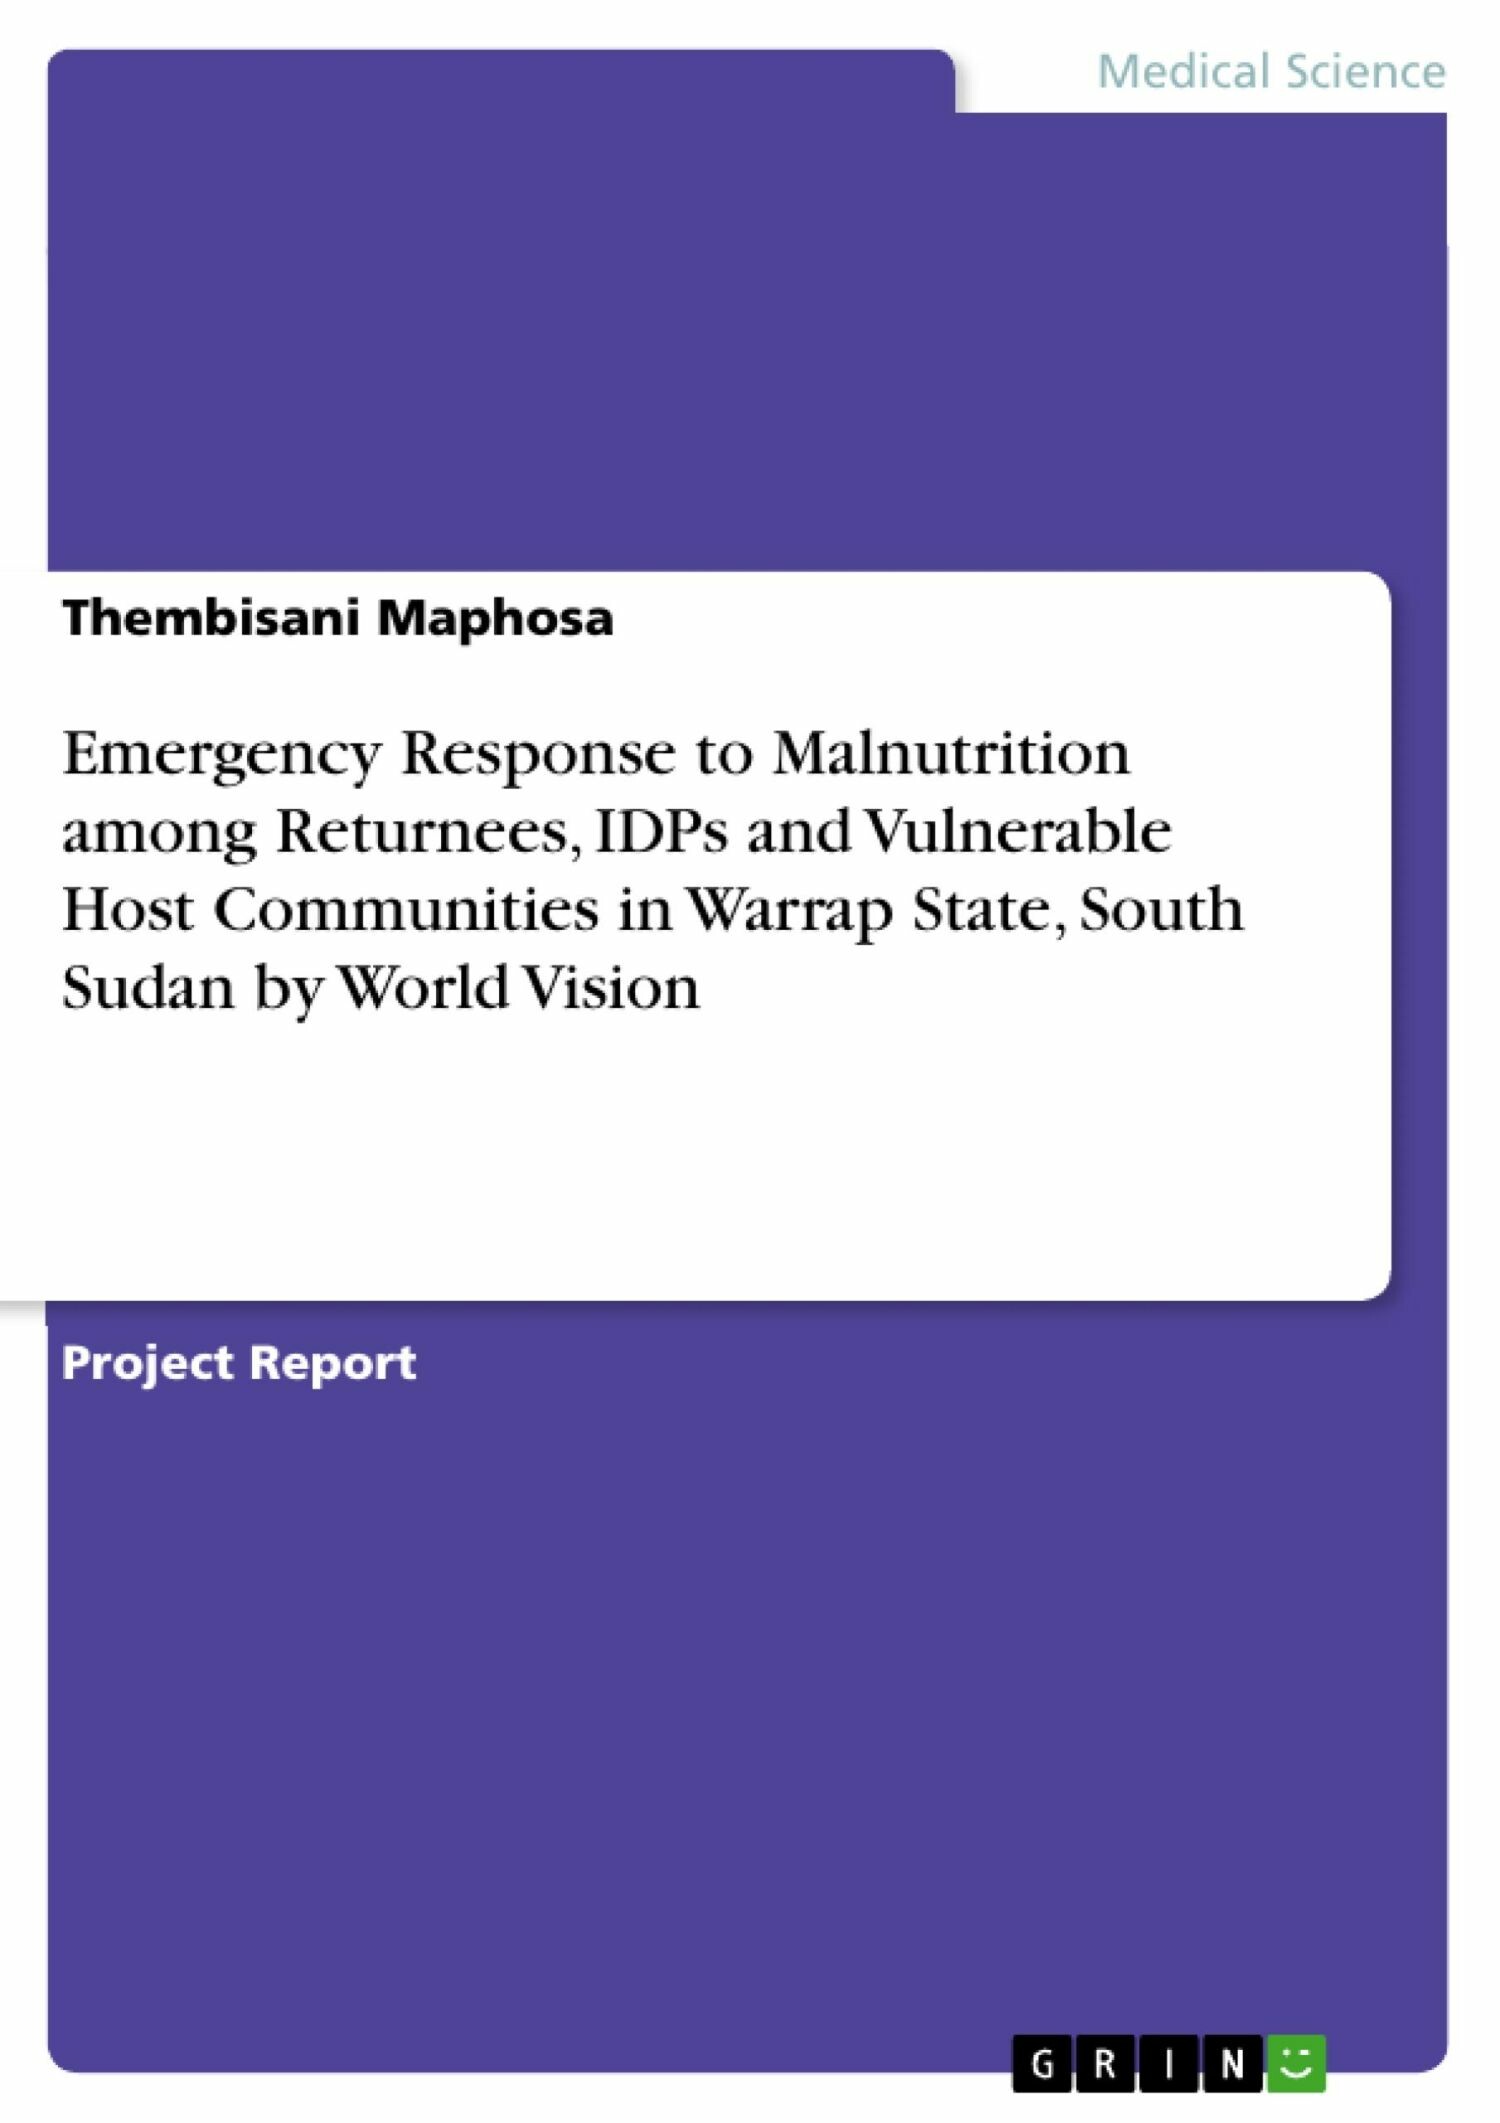 Emergency Response to Malnutrition among Returnees, IDPs and Vulnerable Host Communities in Warrap State, South Sudan by World Vision